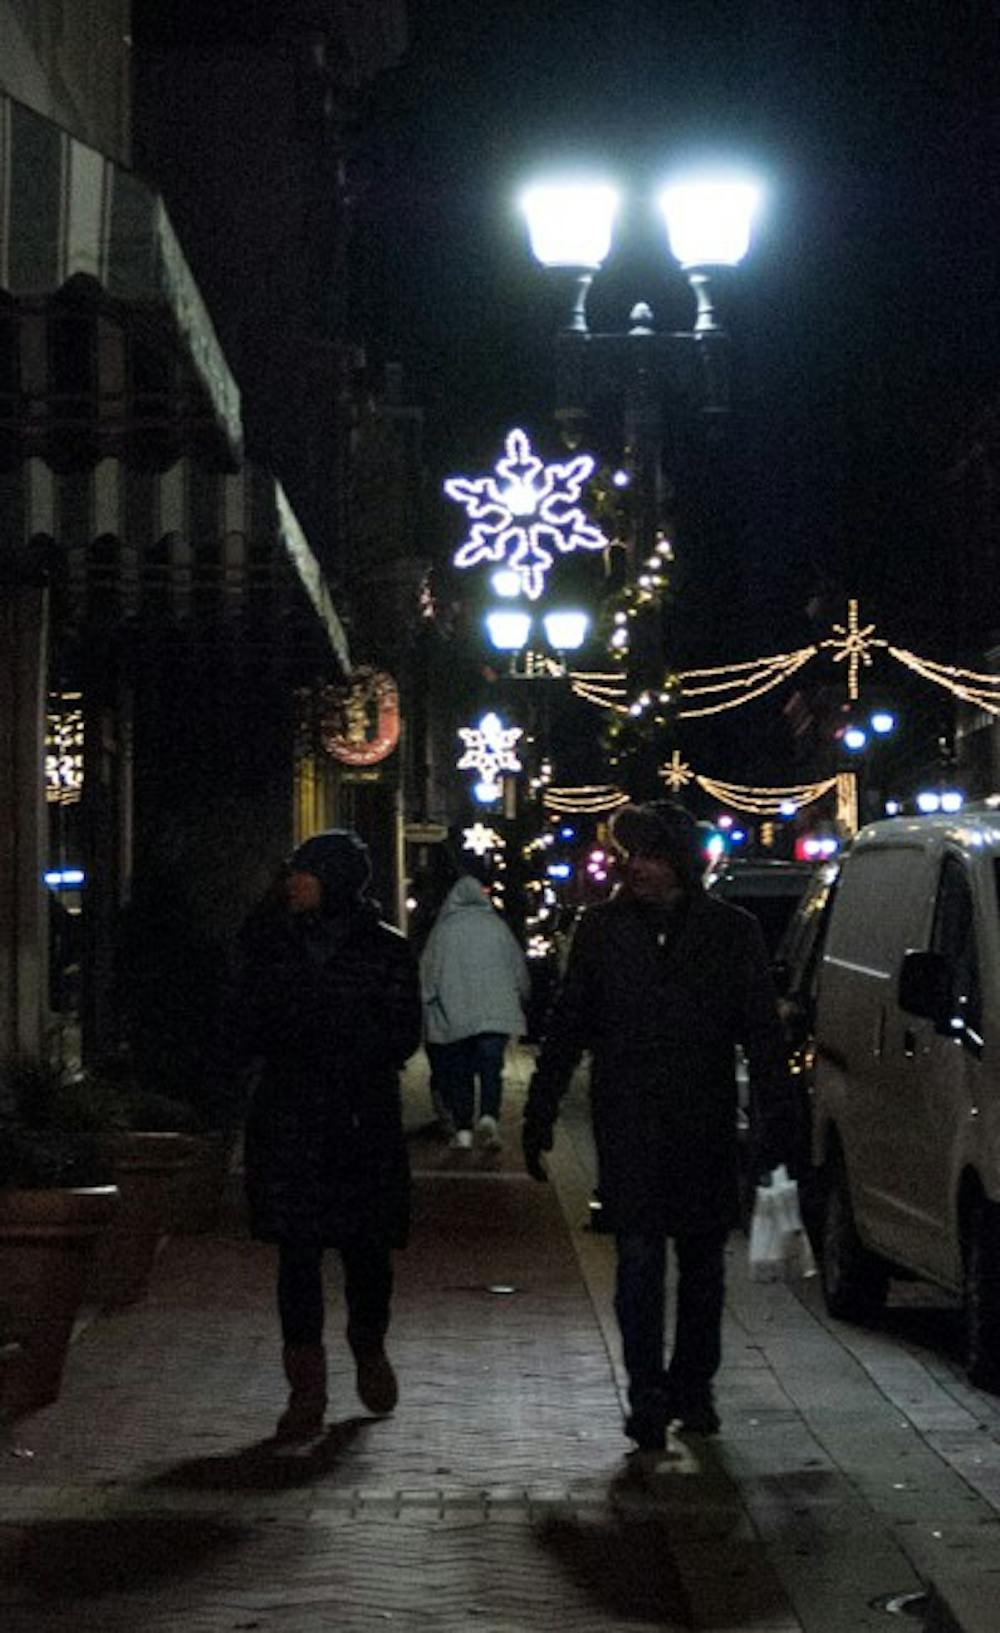 Light Up DWNTWN, powered by AEP, was held on Dec. 7 from 5 - 8 p.m. throughout Downtown Muncie.&nbsp;Community members enjoyed galleries, restaurants, retailers and the Community Tree Lighting ceremony at Canan Commons.&nbsp;